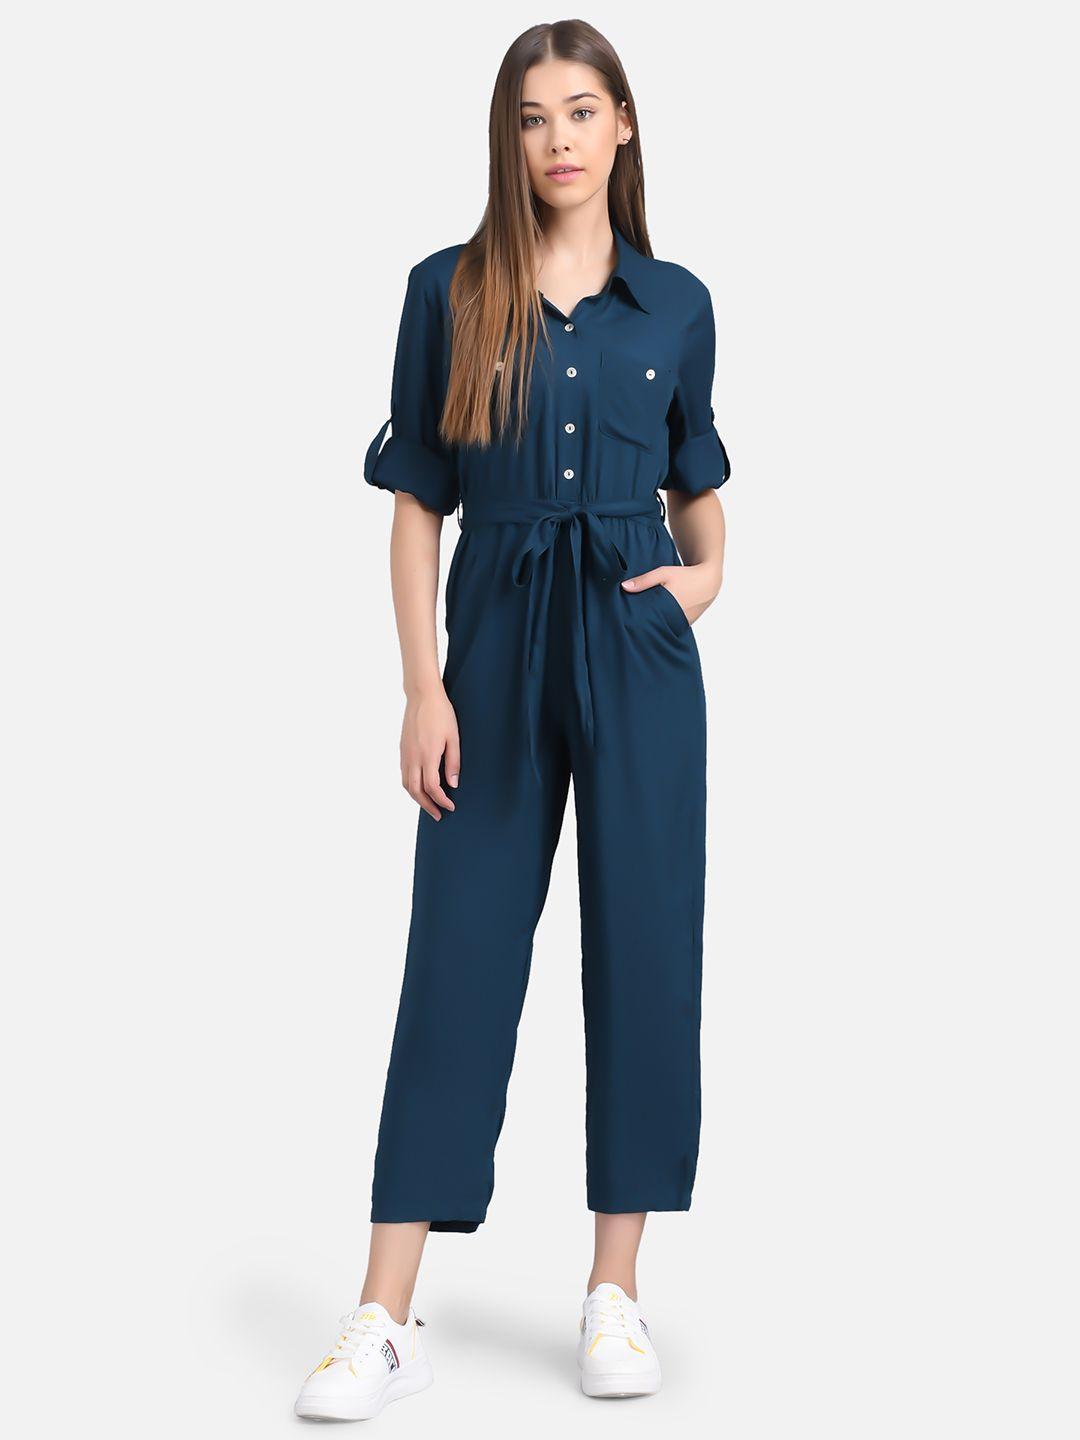 the dry state women teal blue solid basic jumpsuit